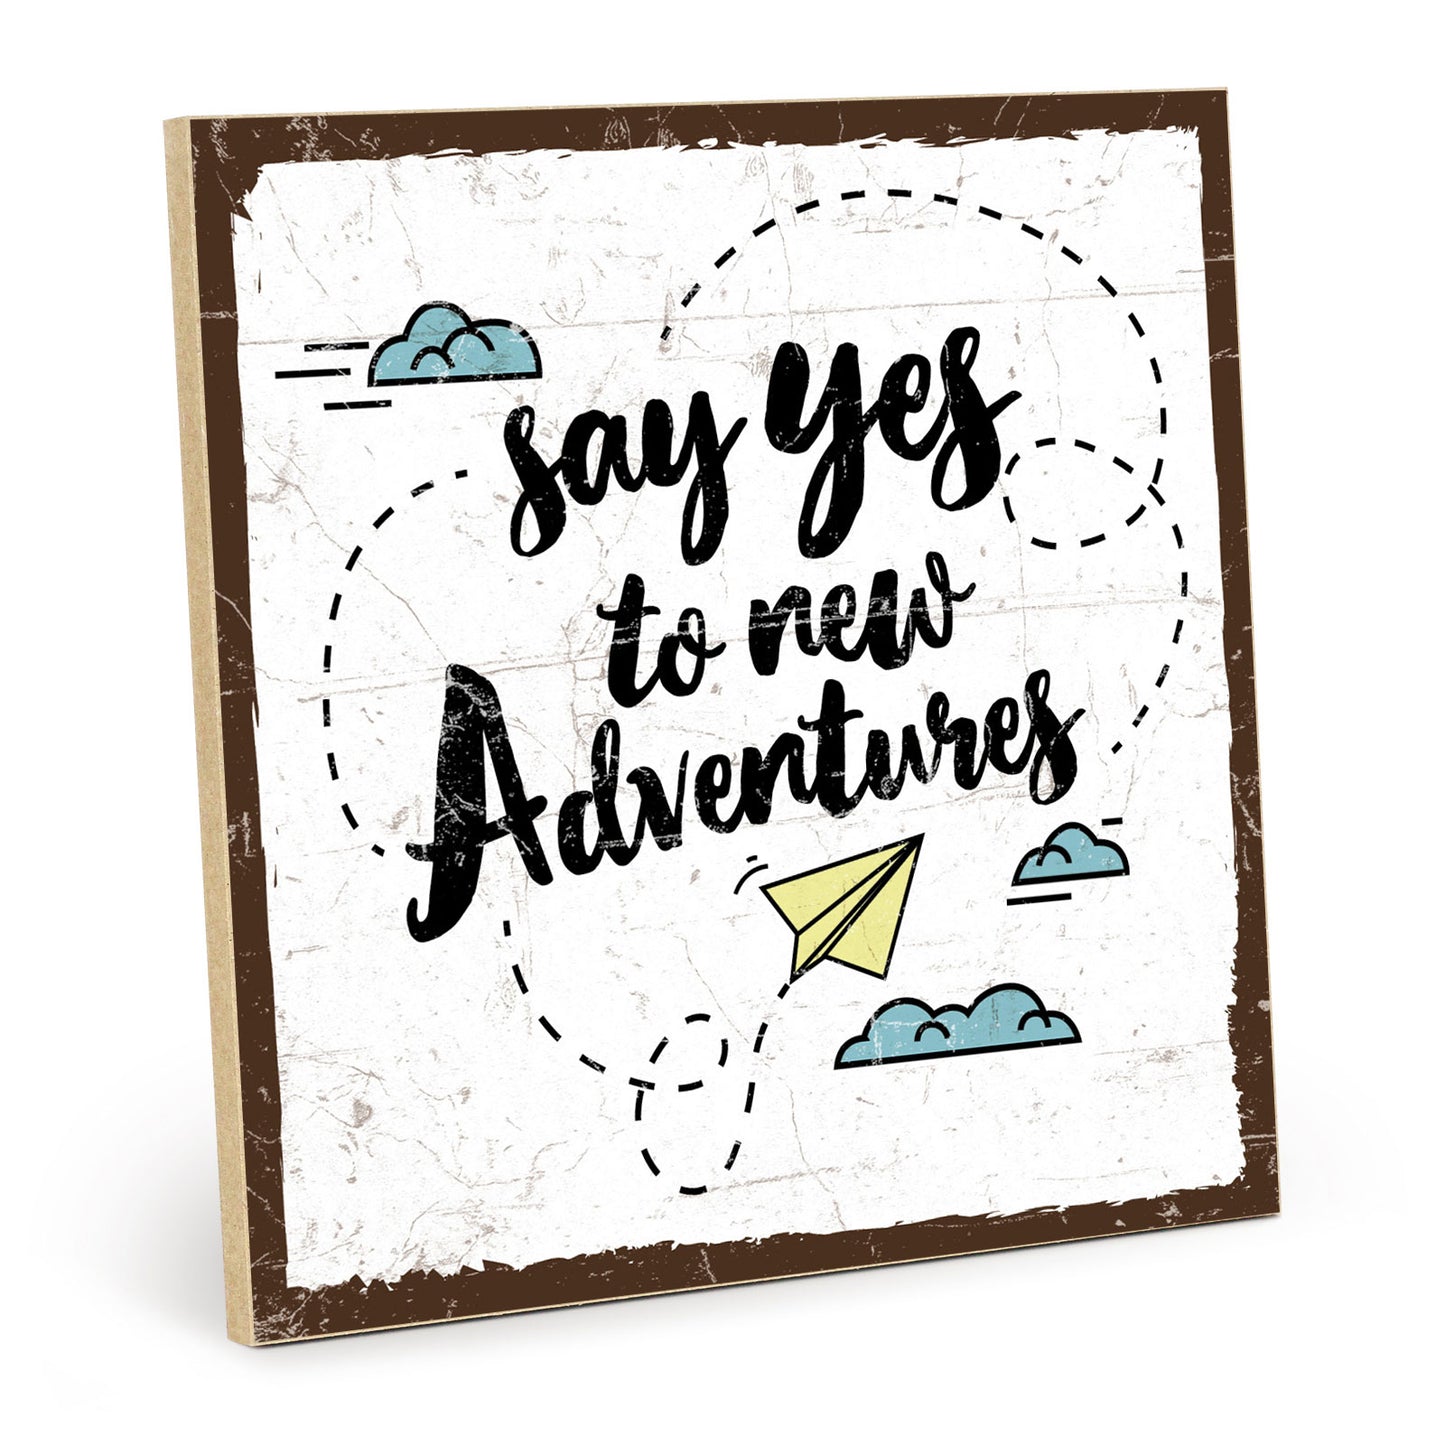 Holzschild mit Spruch - Say yes to new adventures – HS-QN-00920